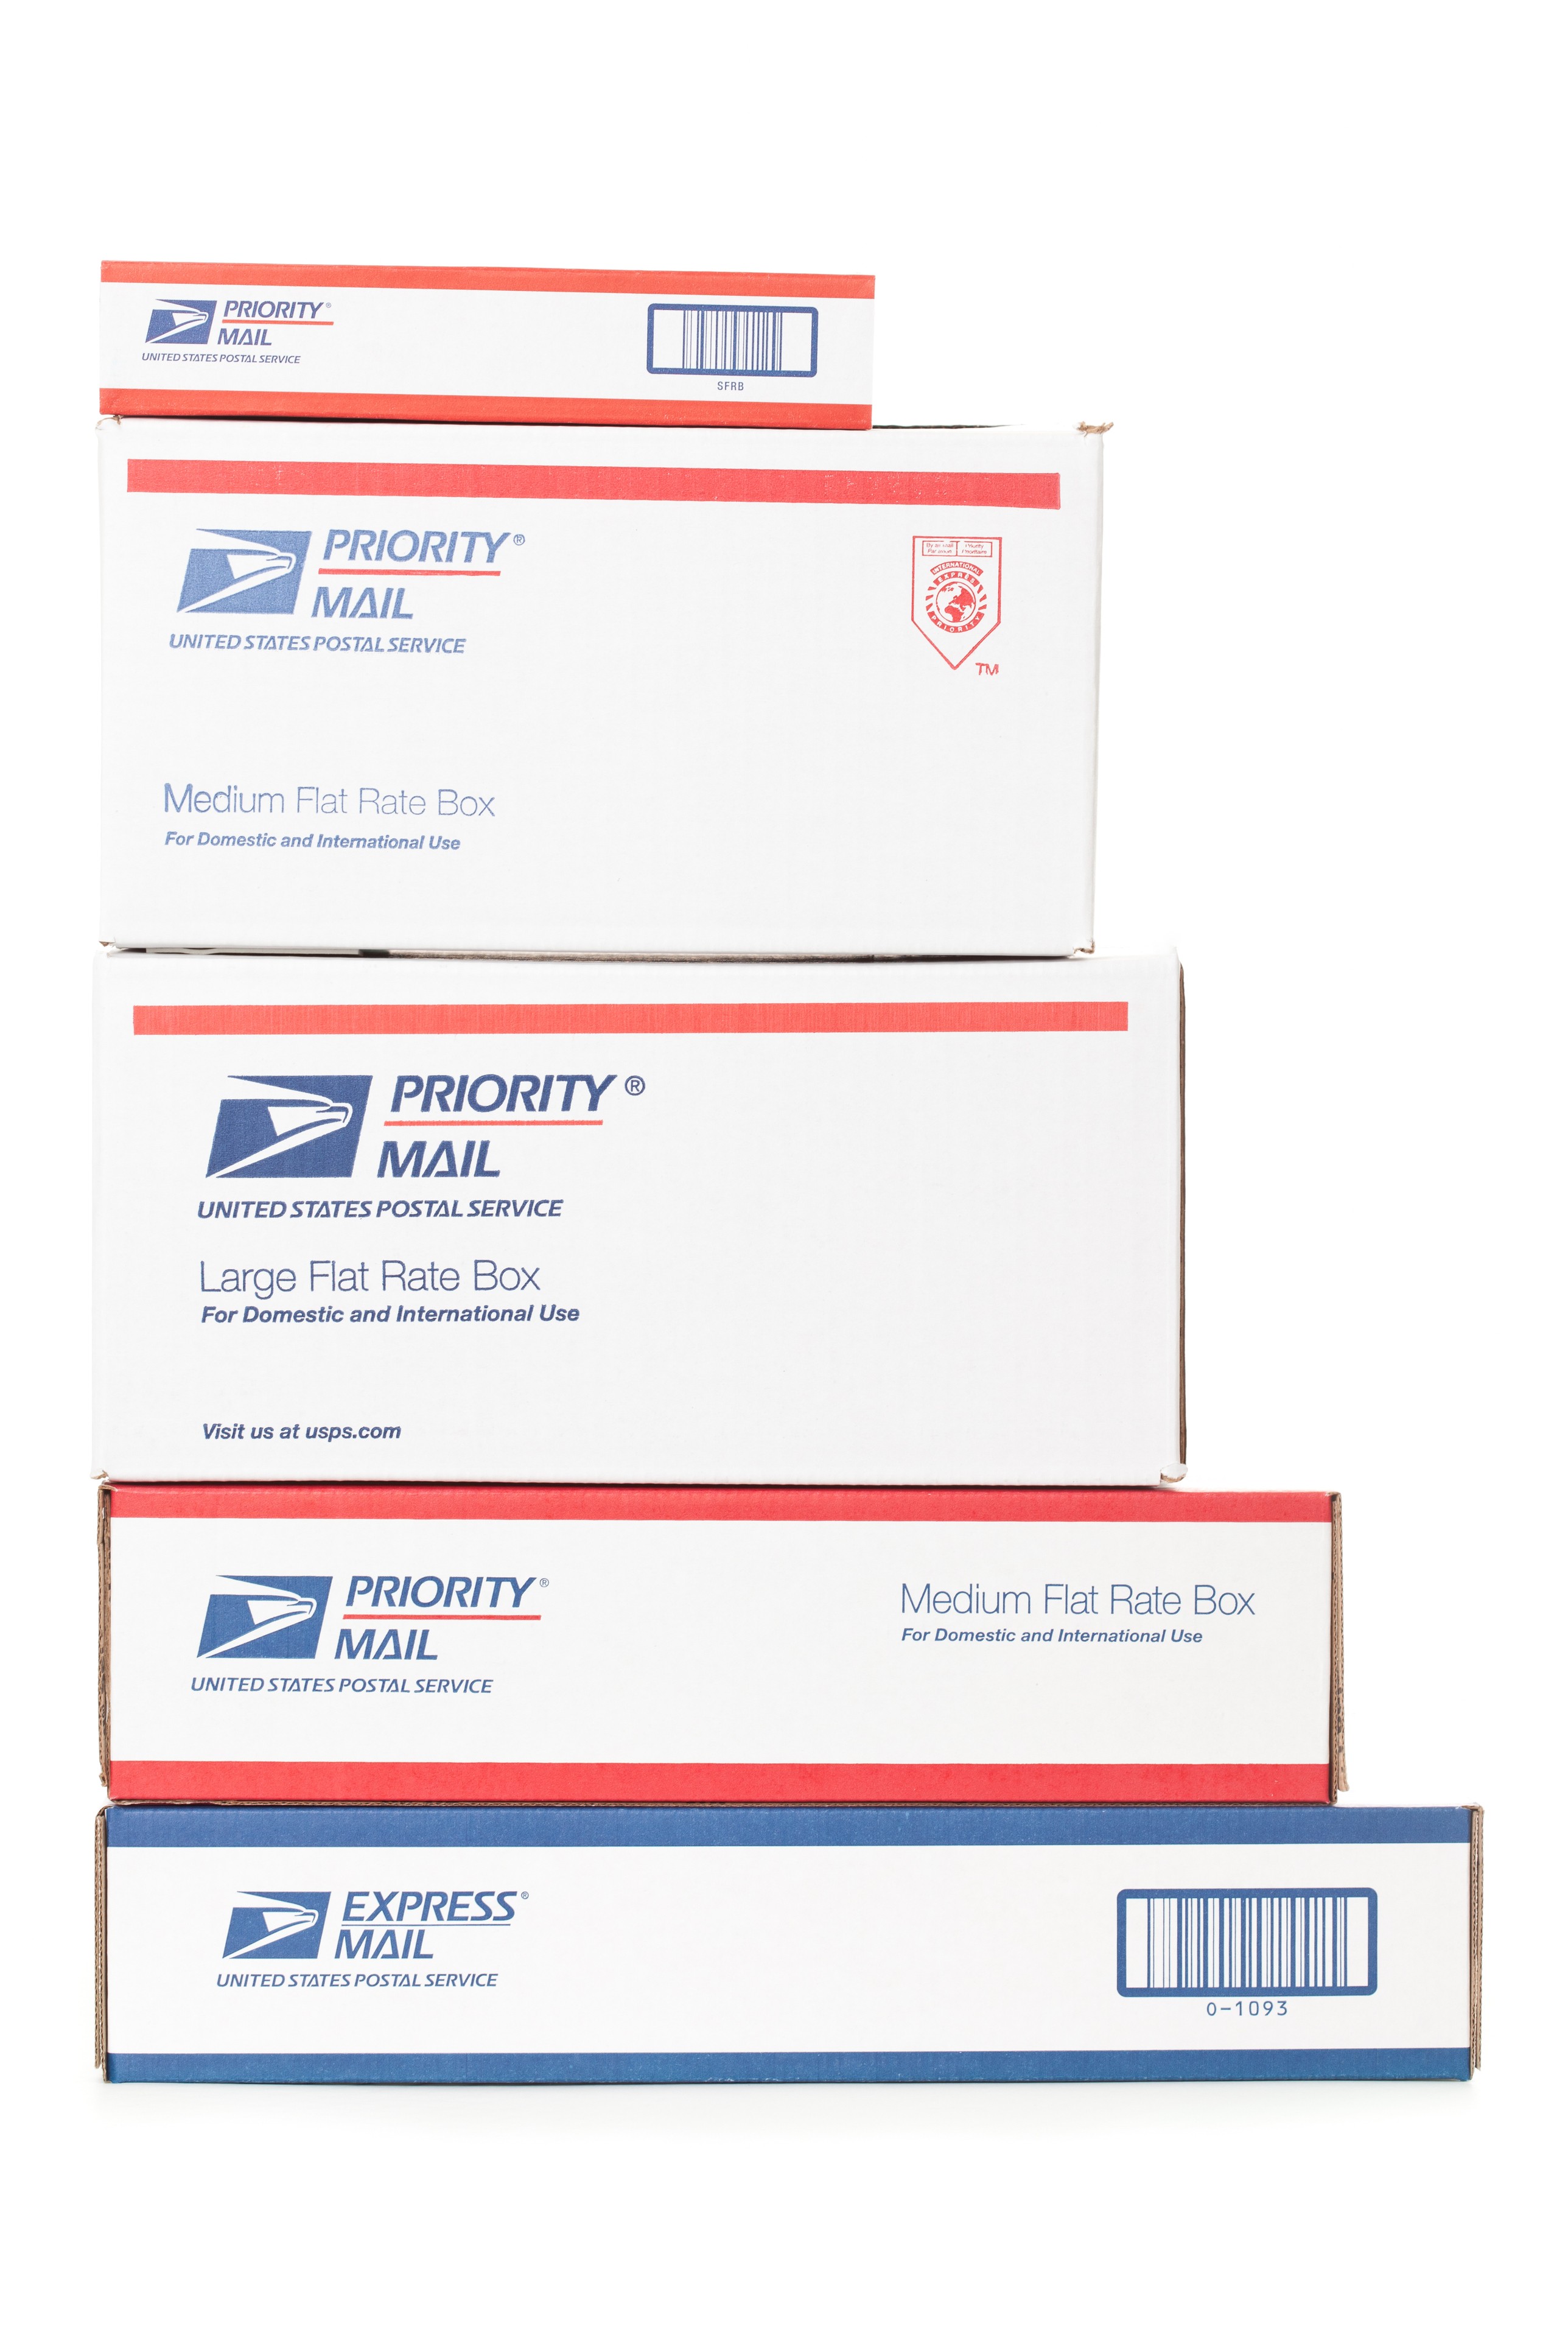 Upgrade to USPS Overnight Delivery via Priority Mail Express